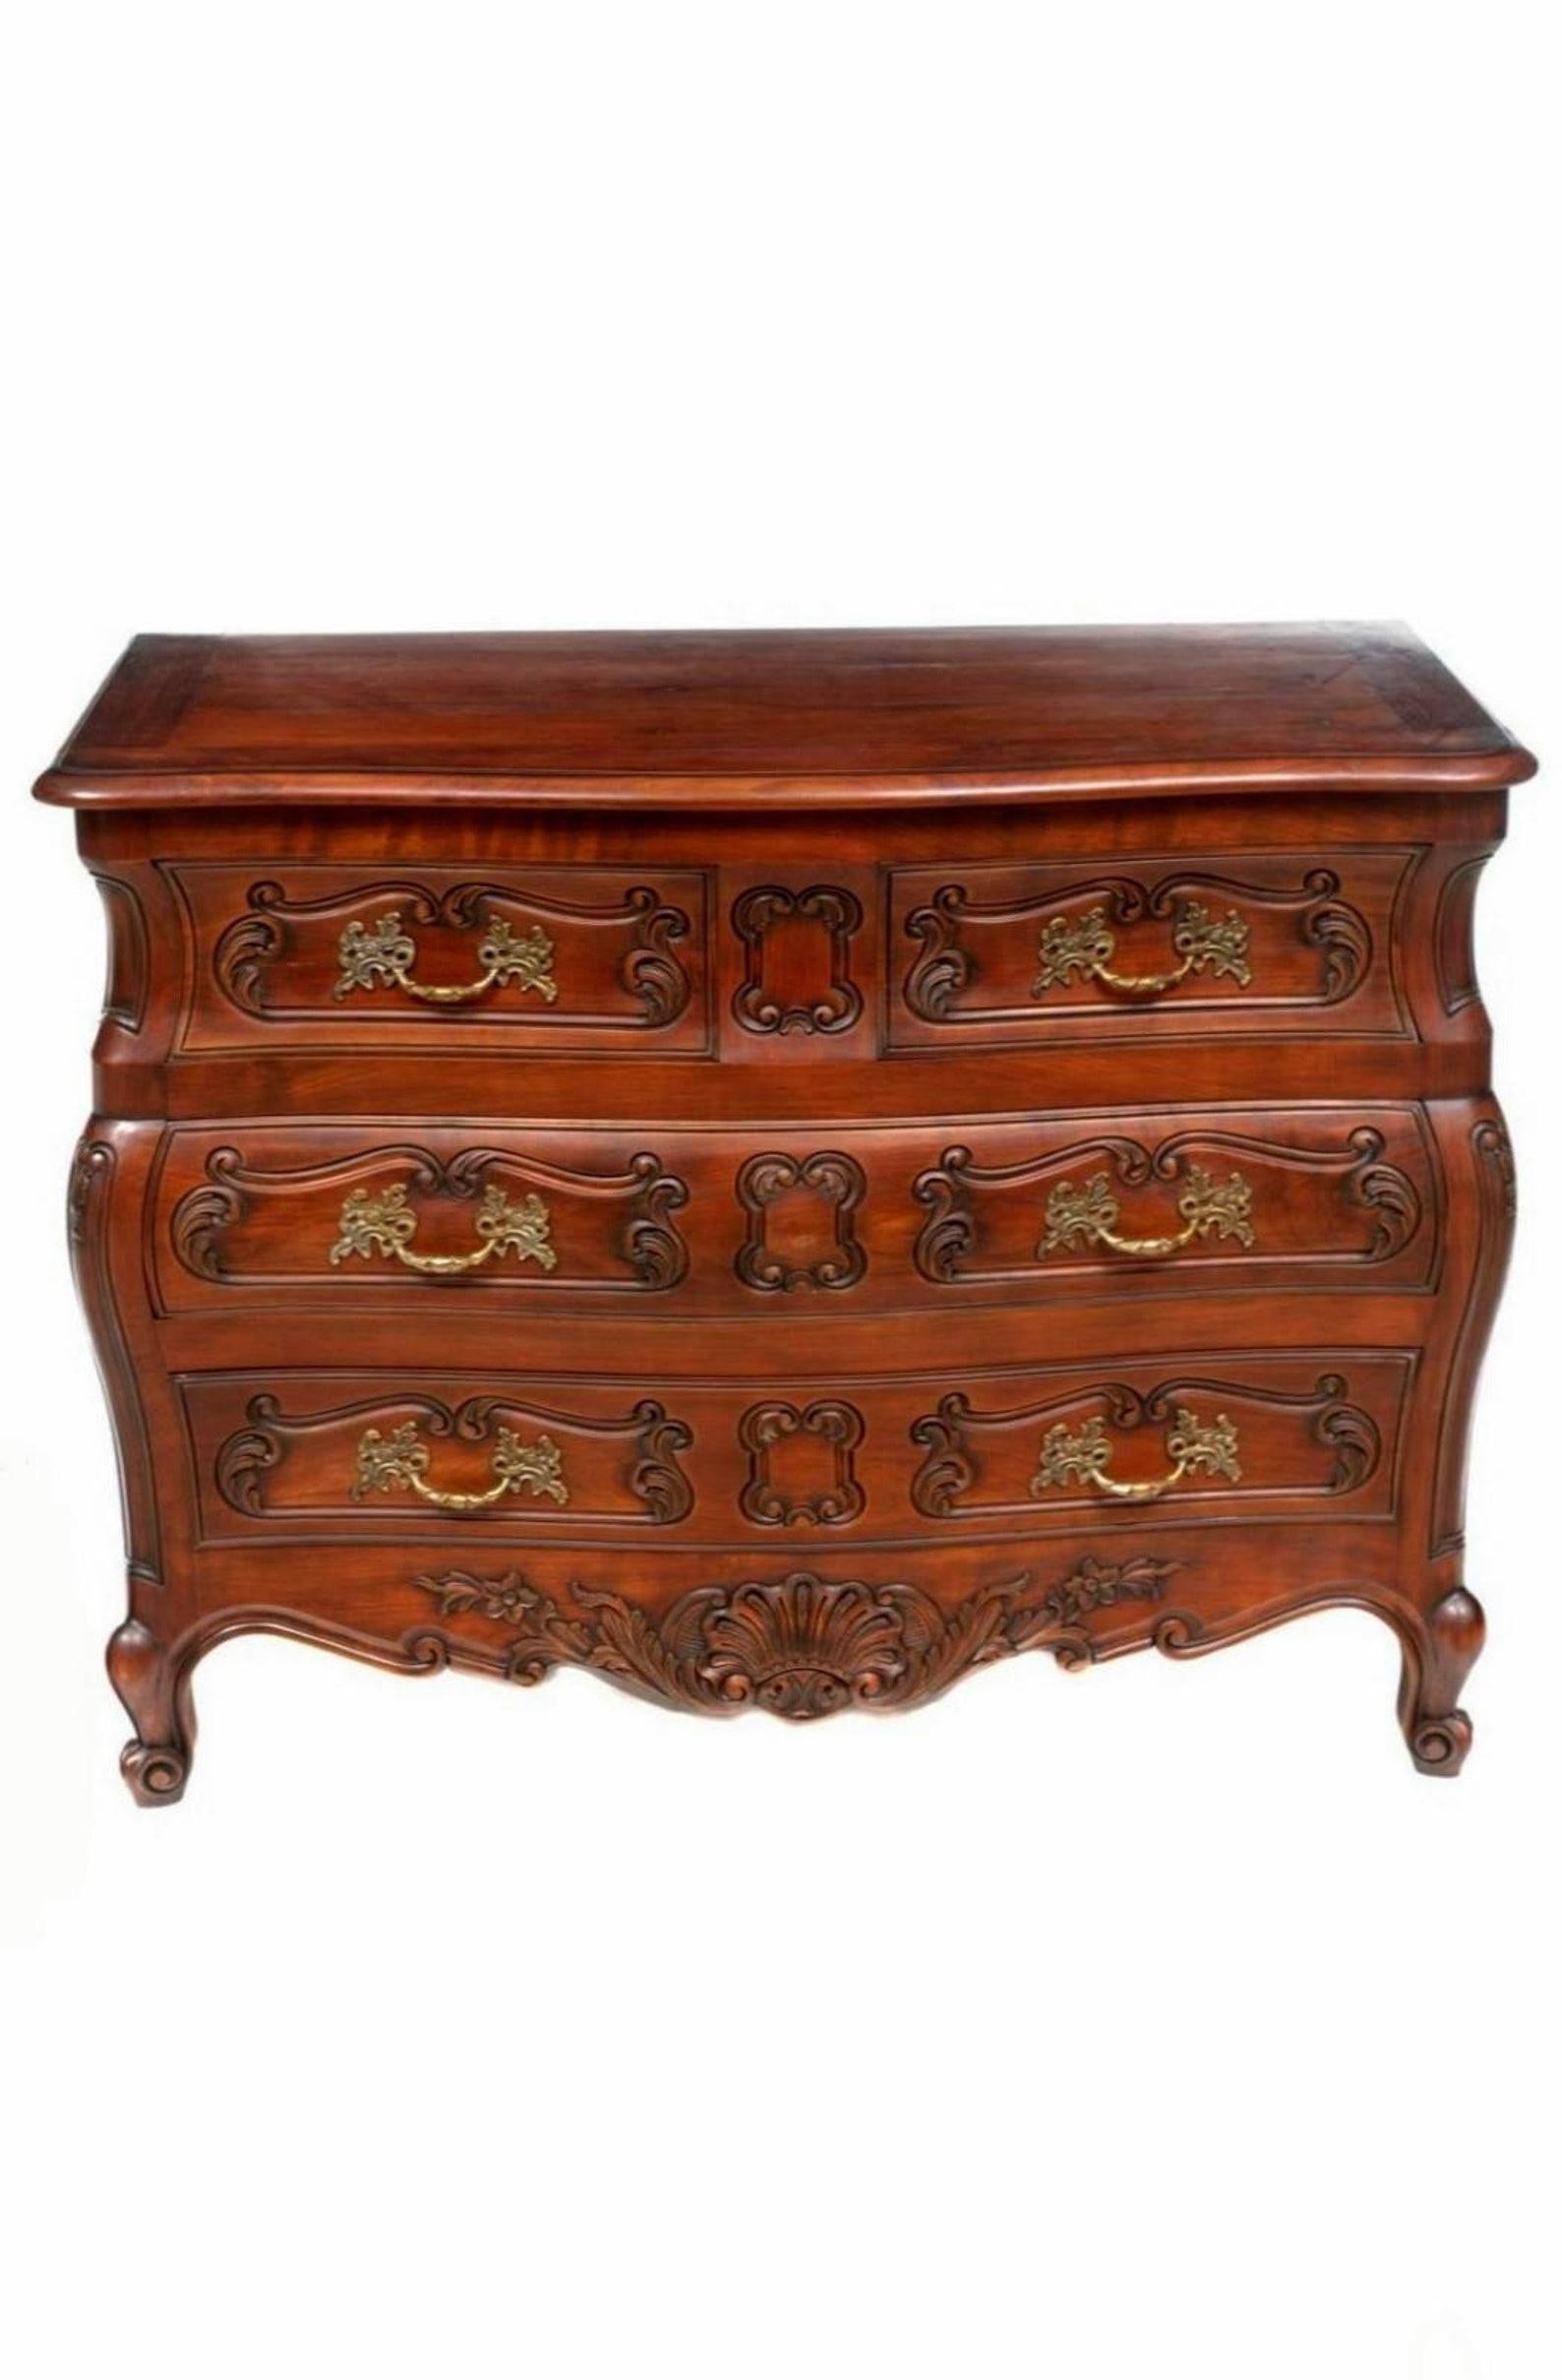 An elegantly sophisticated French Provincial Louis XV style bombe chest of drawers commode. 

Exquisitely hand-crafted in France in the late 19th century, featuring a handsome dark rich finish, well formed and gracefully curvacious silhouette,